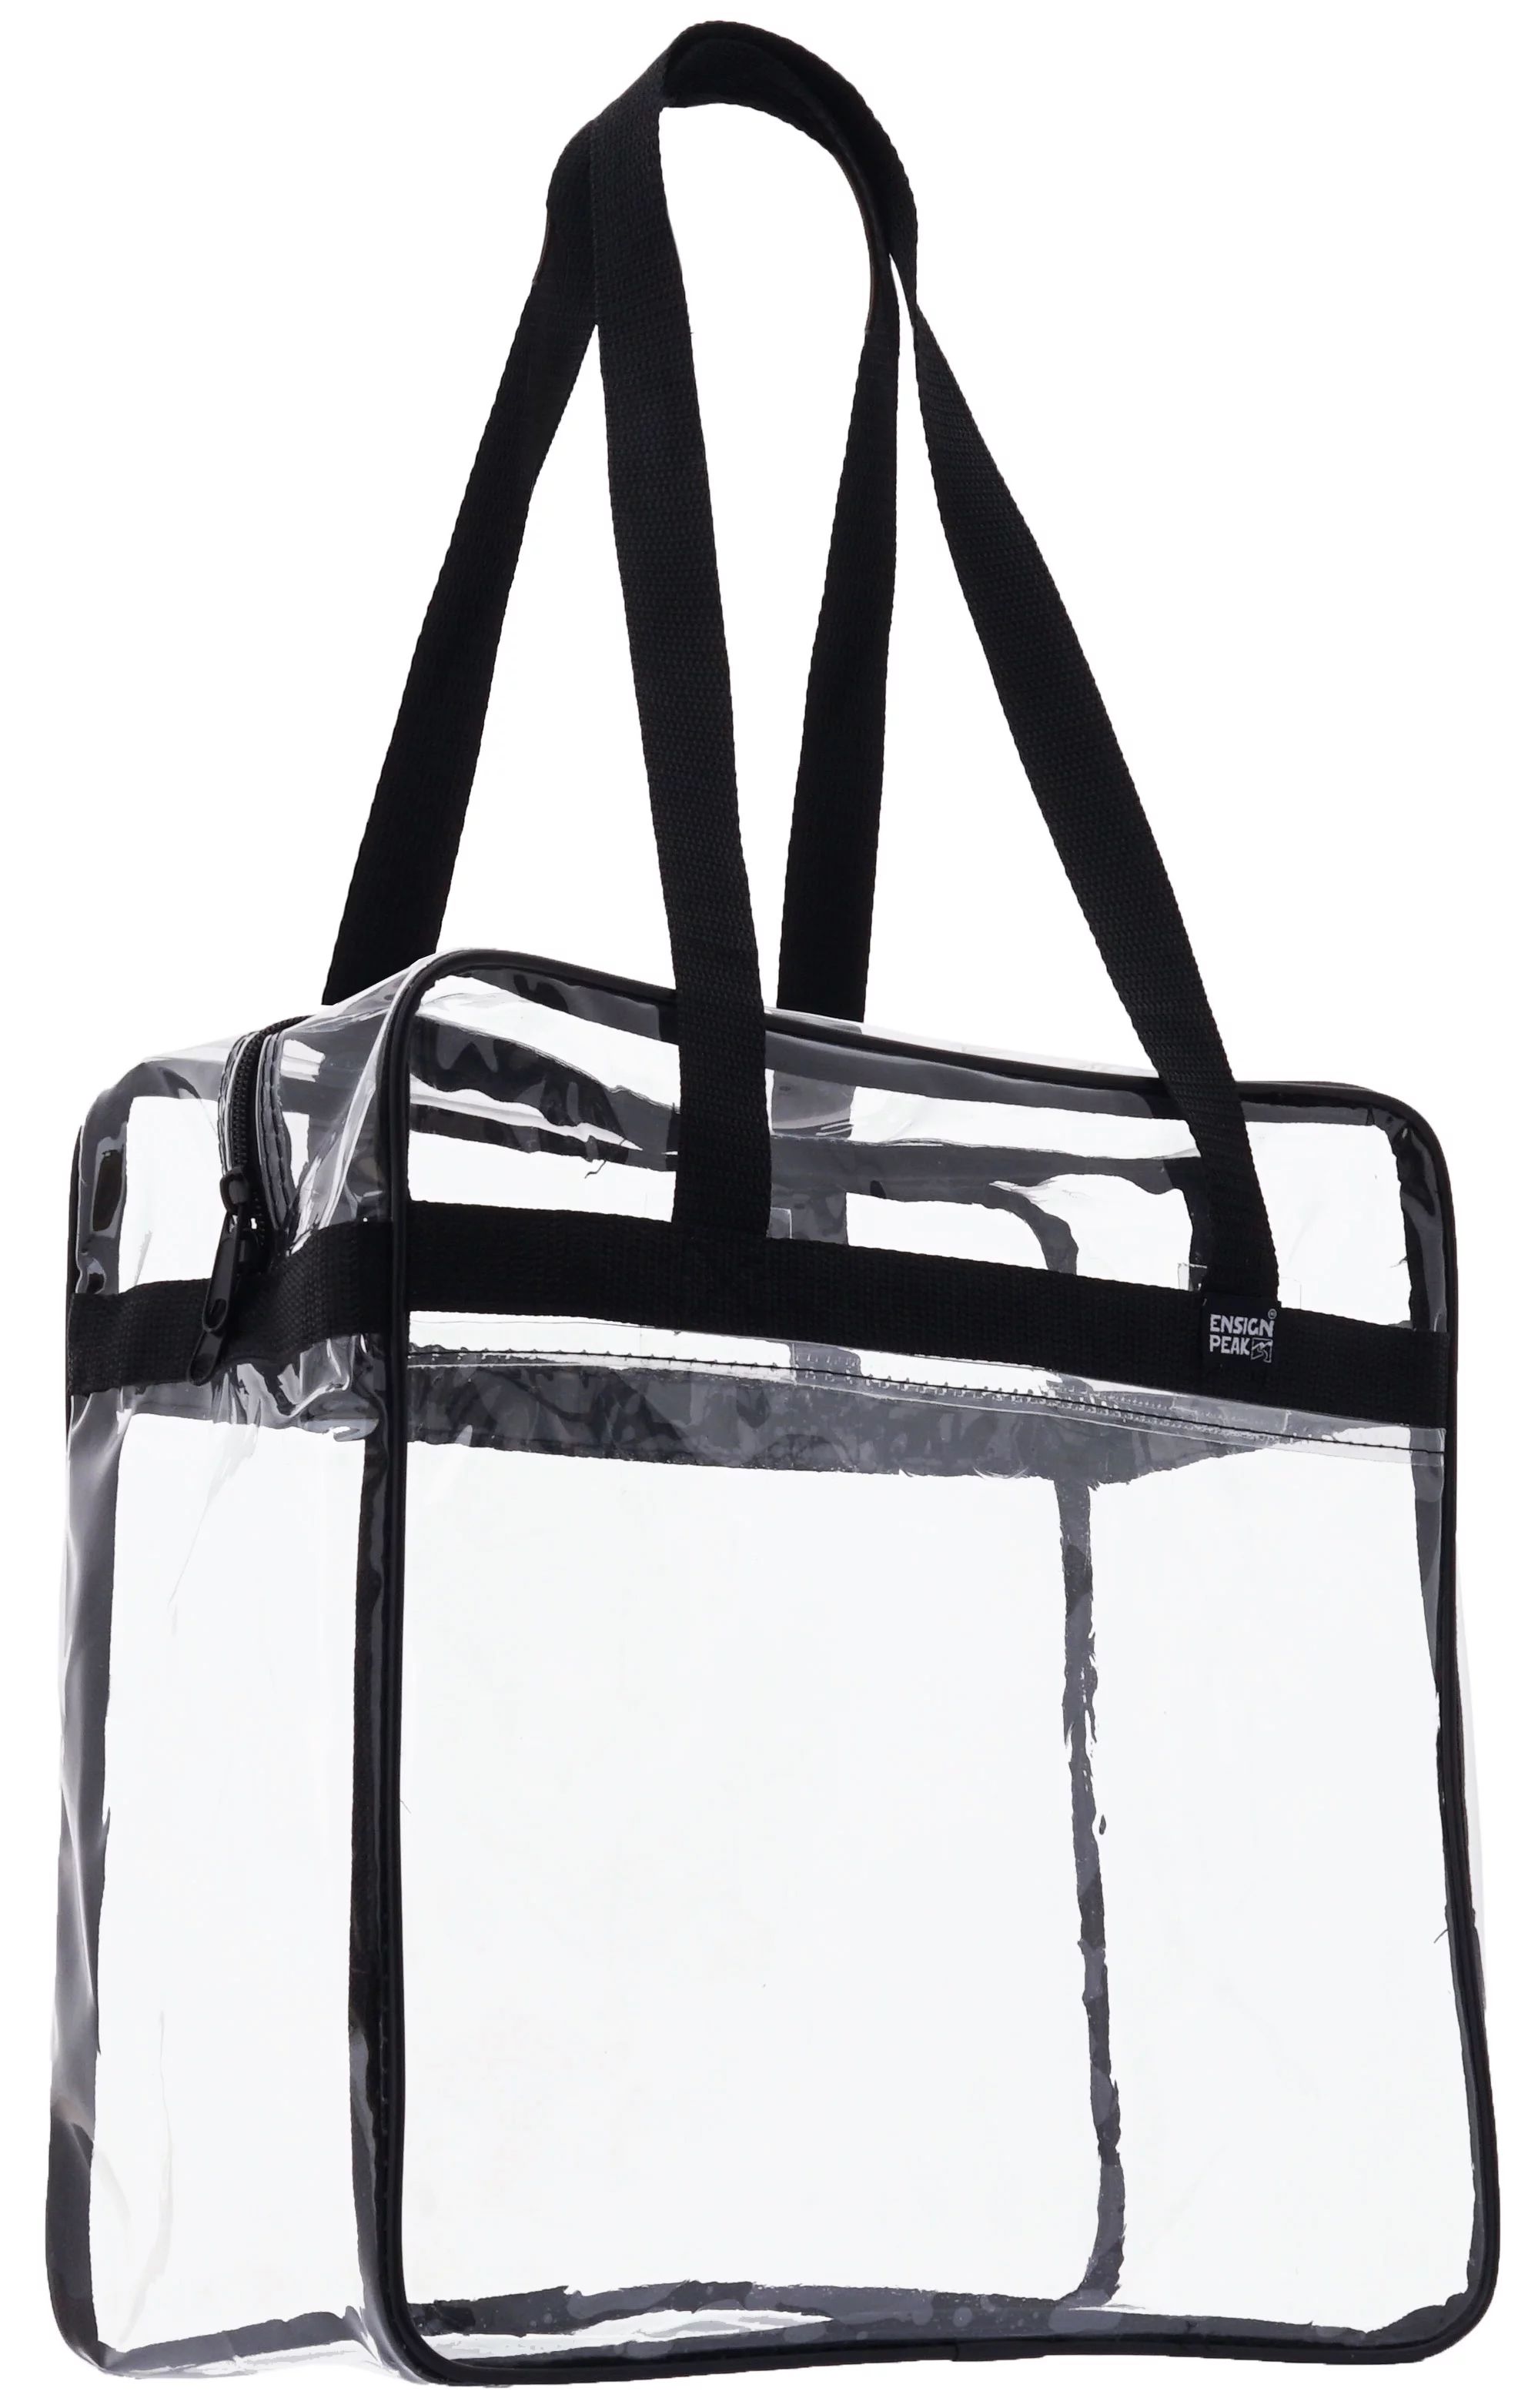 Ensign Peak Clear Tote Bag NFL Stadium Approved - 12" X 12" X 6" - Shoulder straps and zippered t... | Walmart (US)